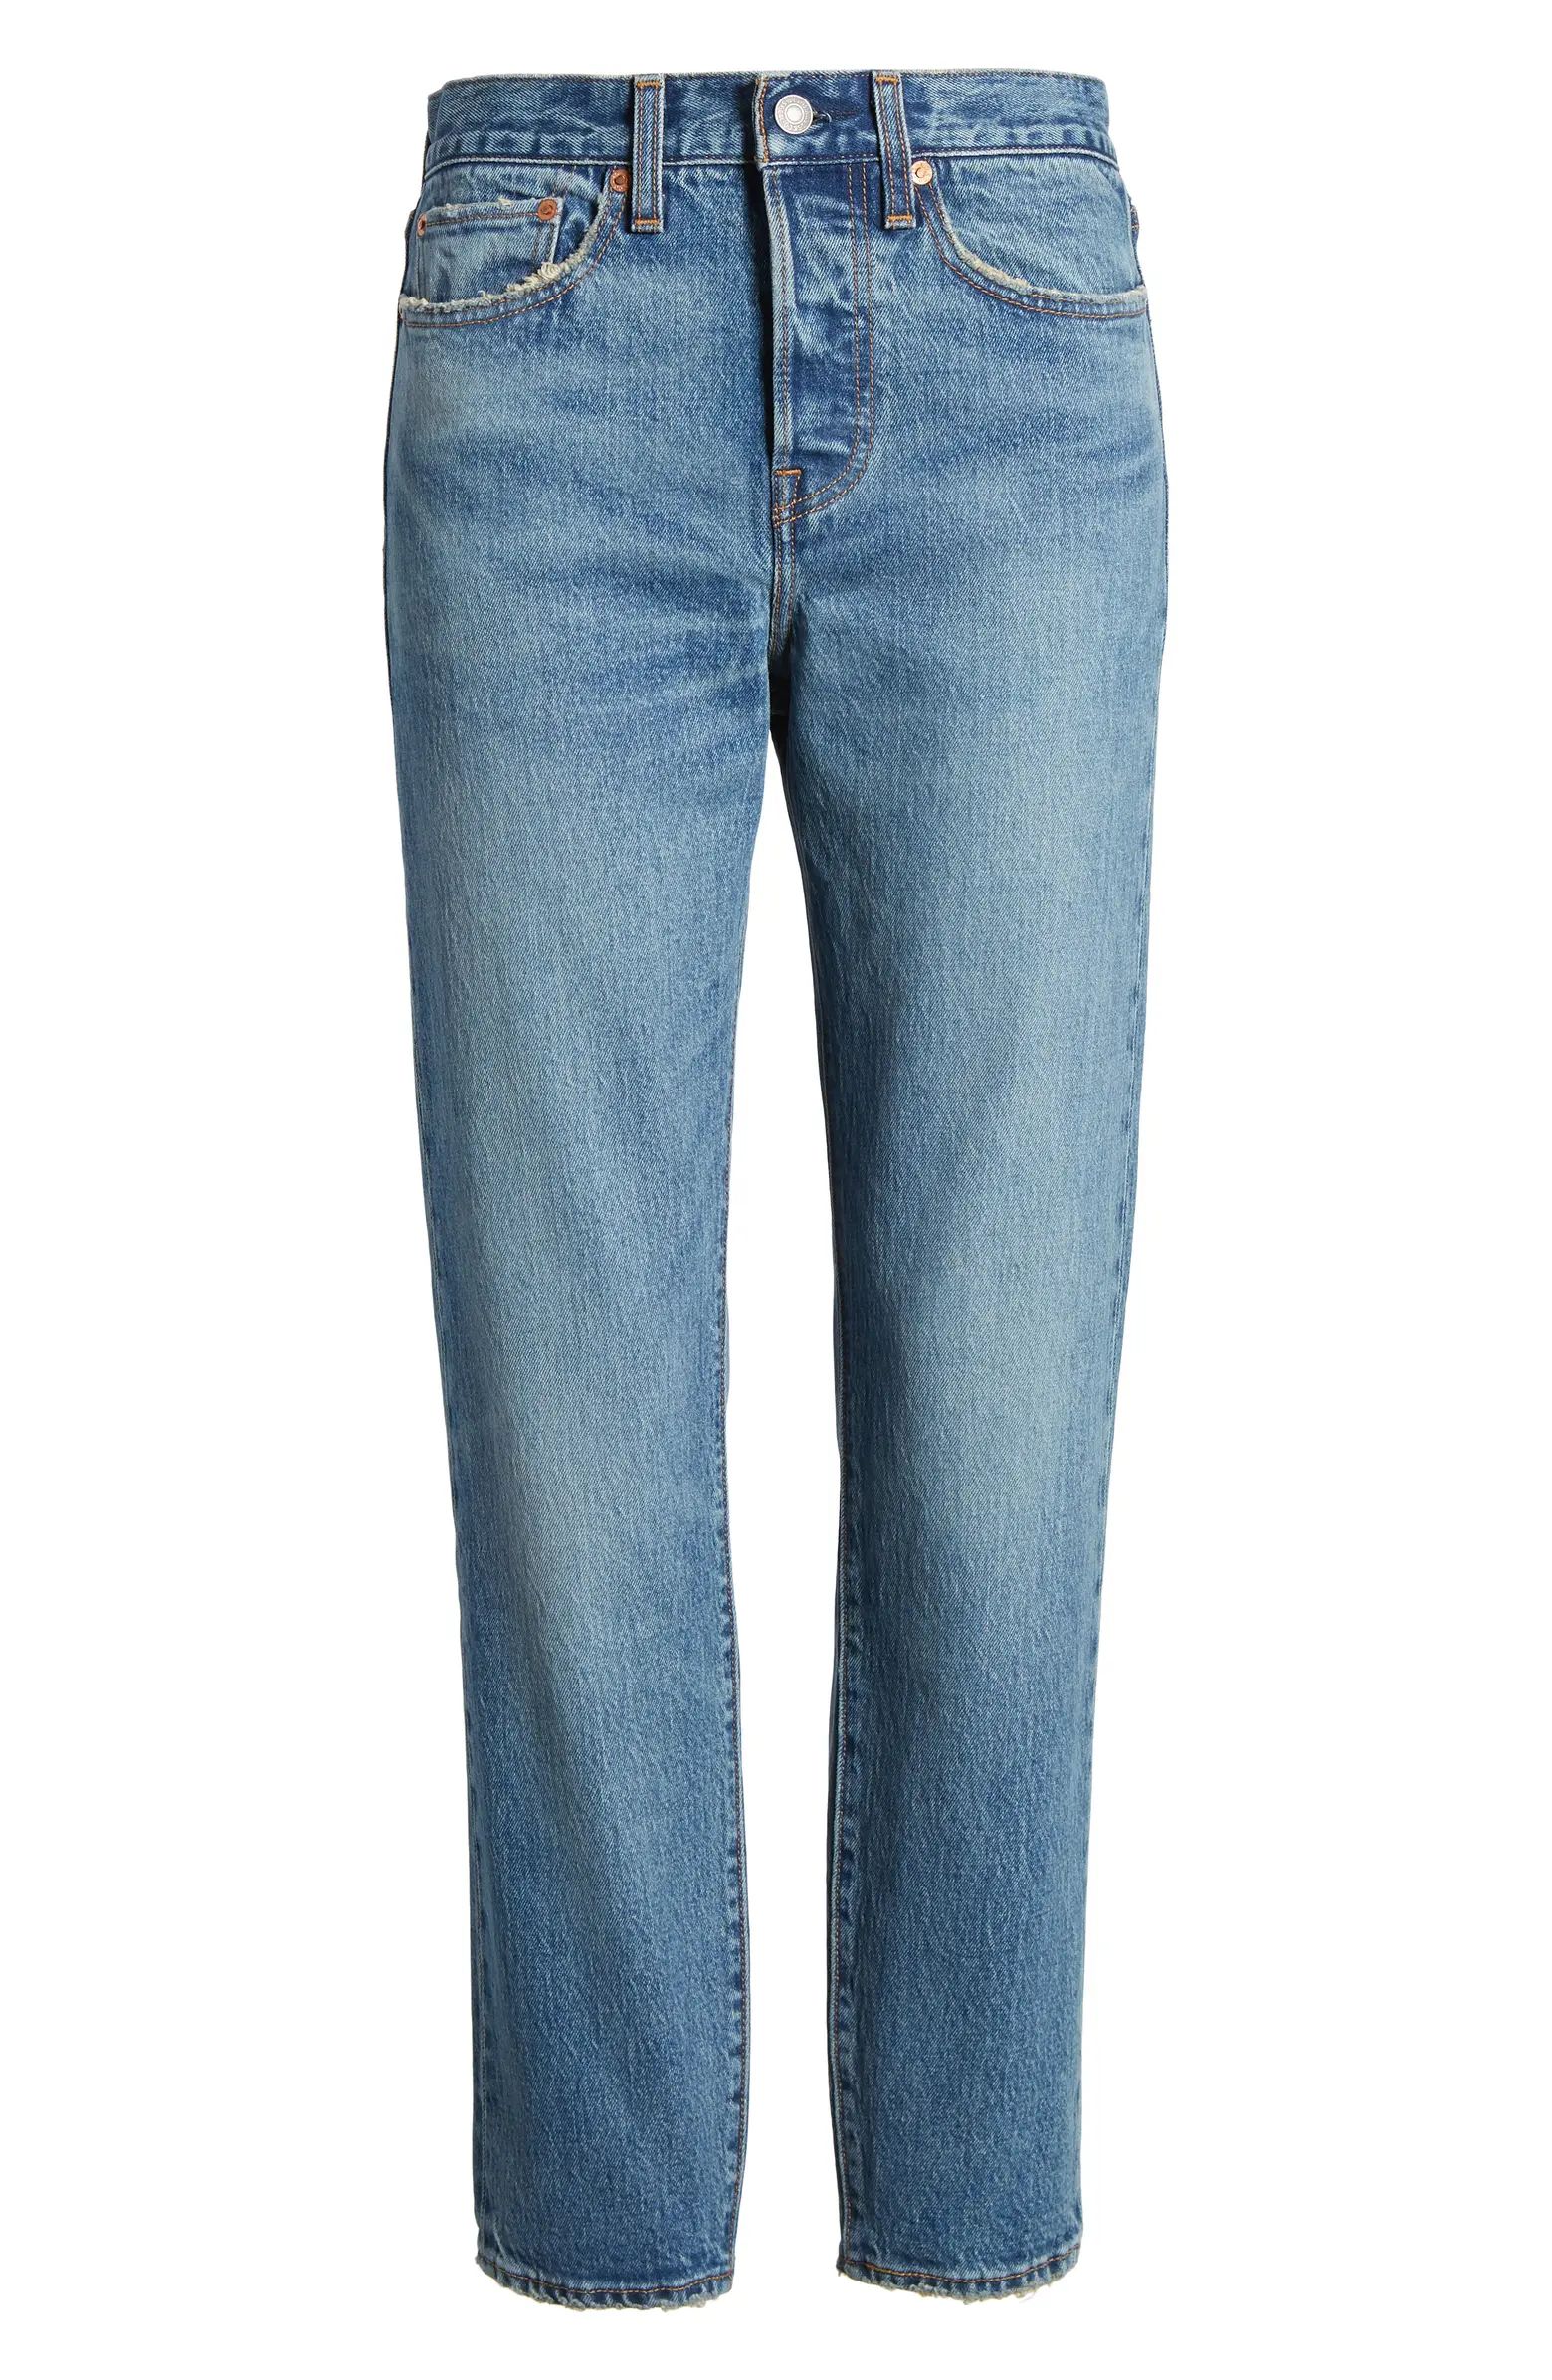 Wedgie Icon Fit High Waist Straight Leg Jeans | Nordstrom